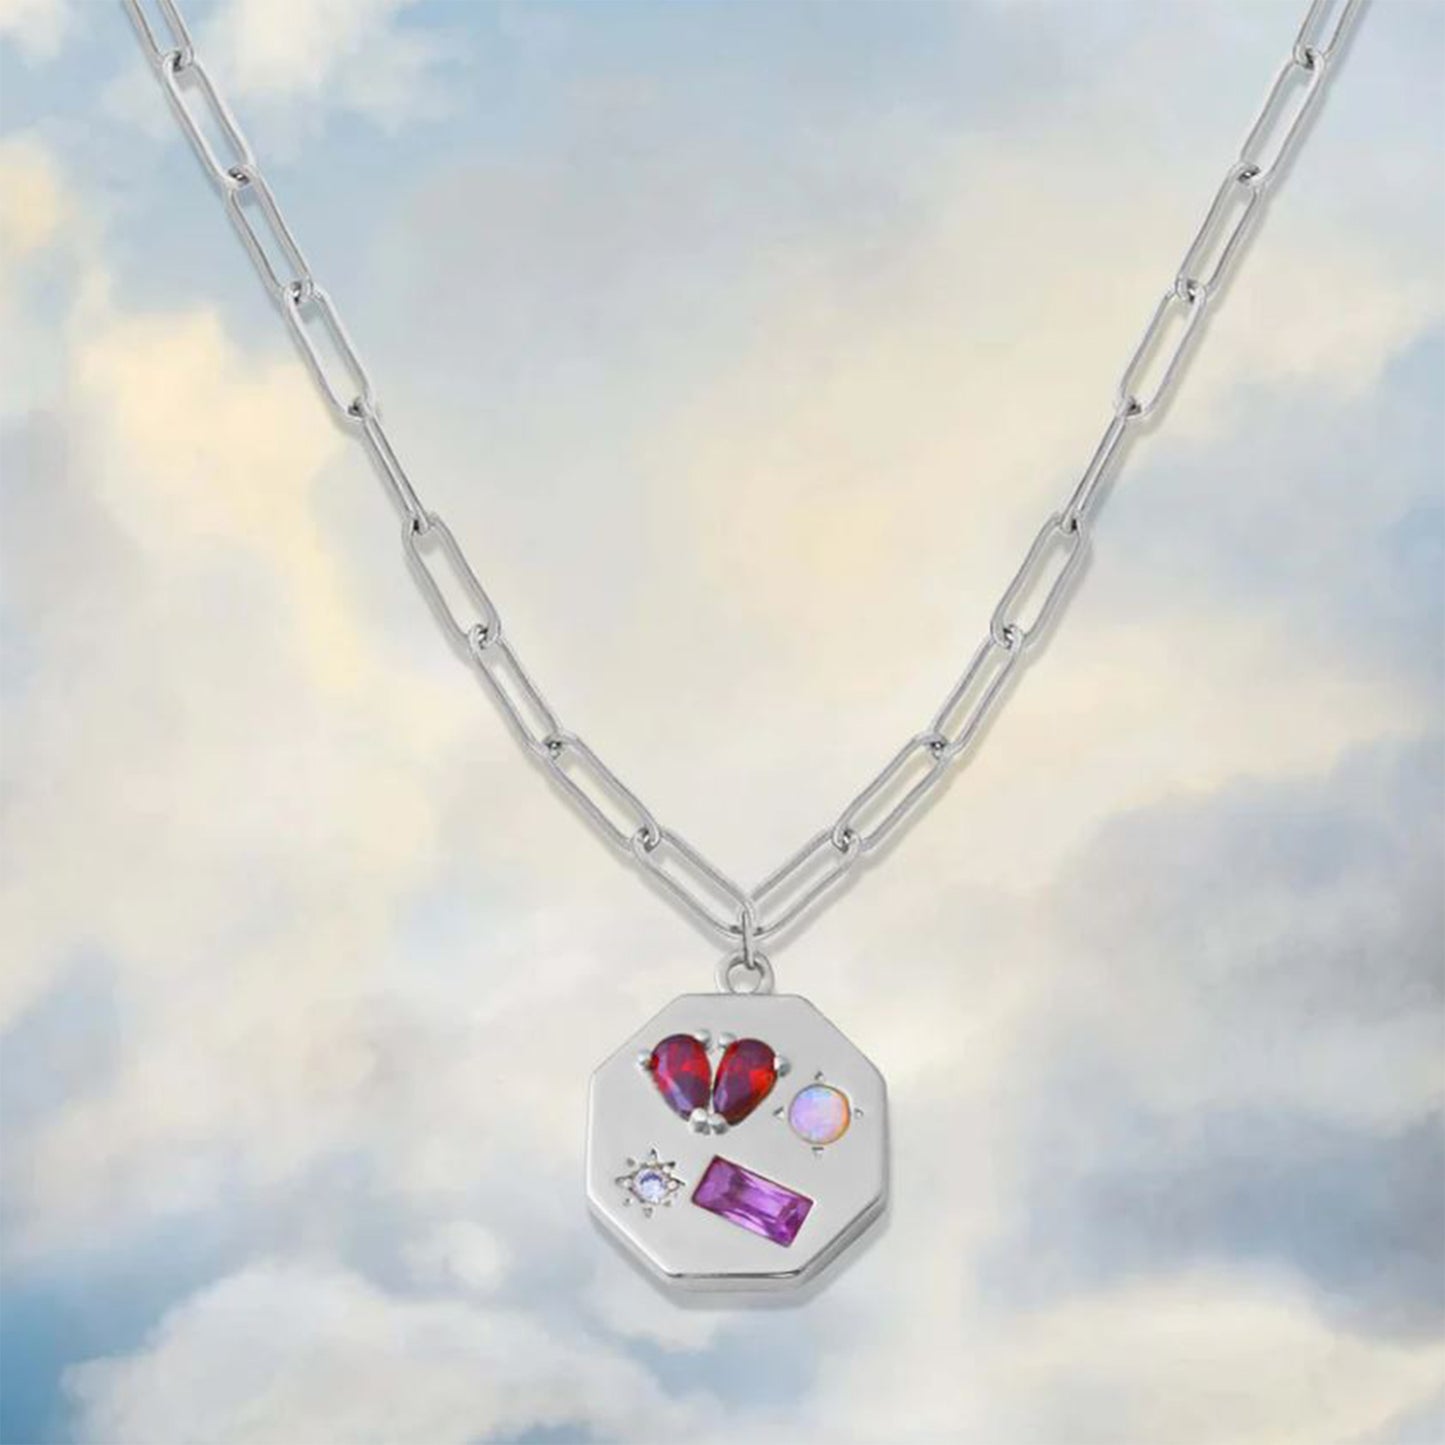 geometric silver pendant with gemstones on a cloudy sky background